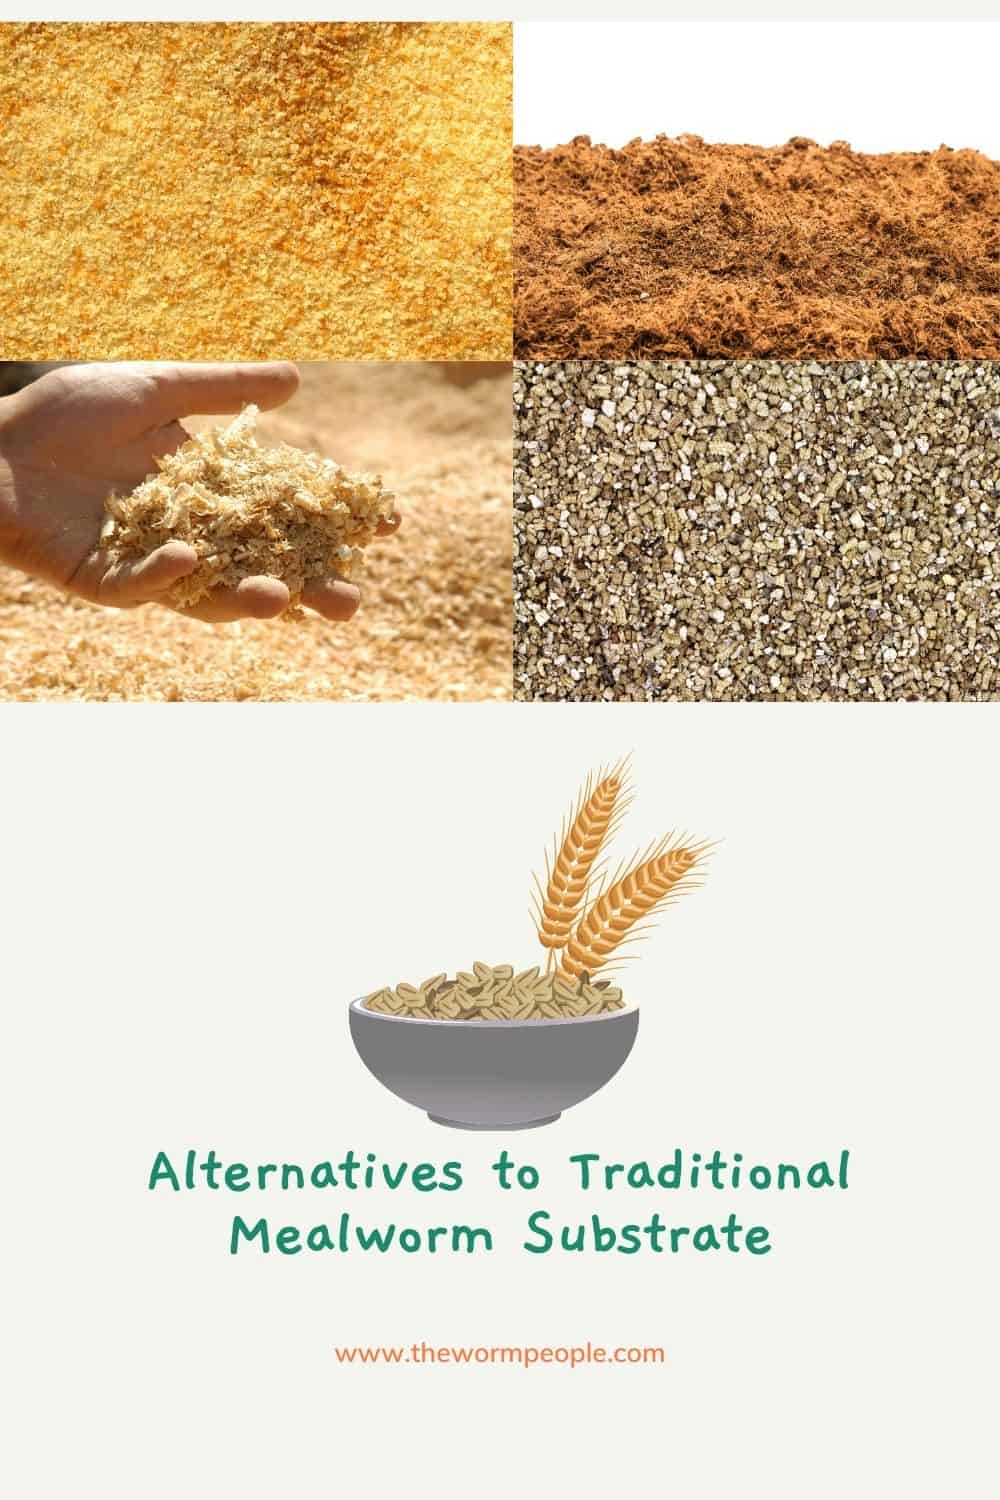 Alternatives to traditional mealworm substrate